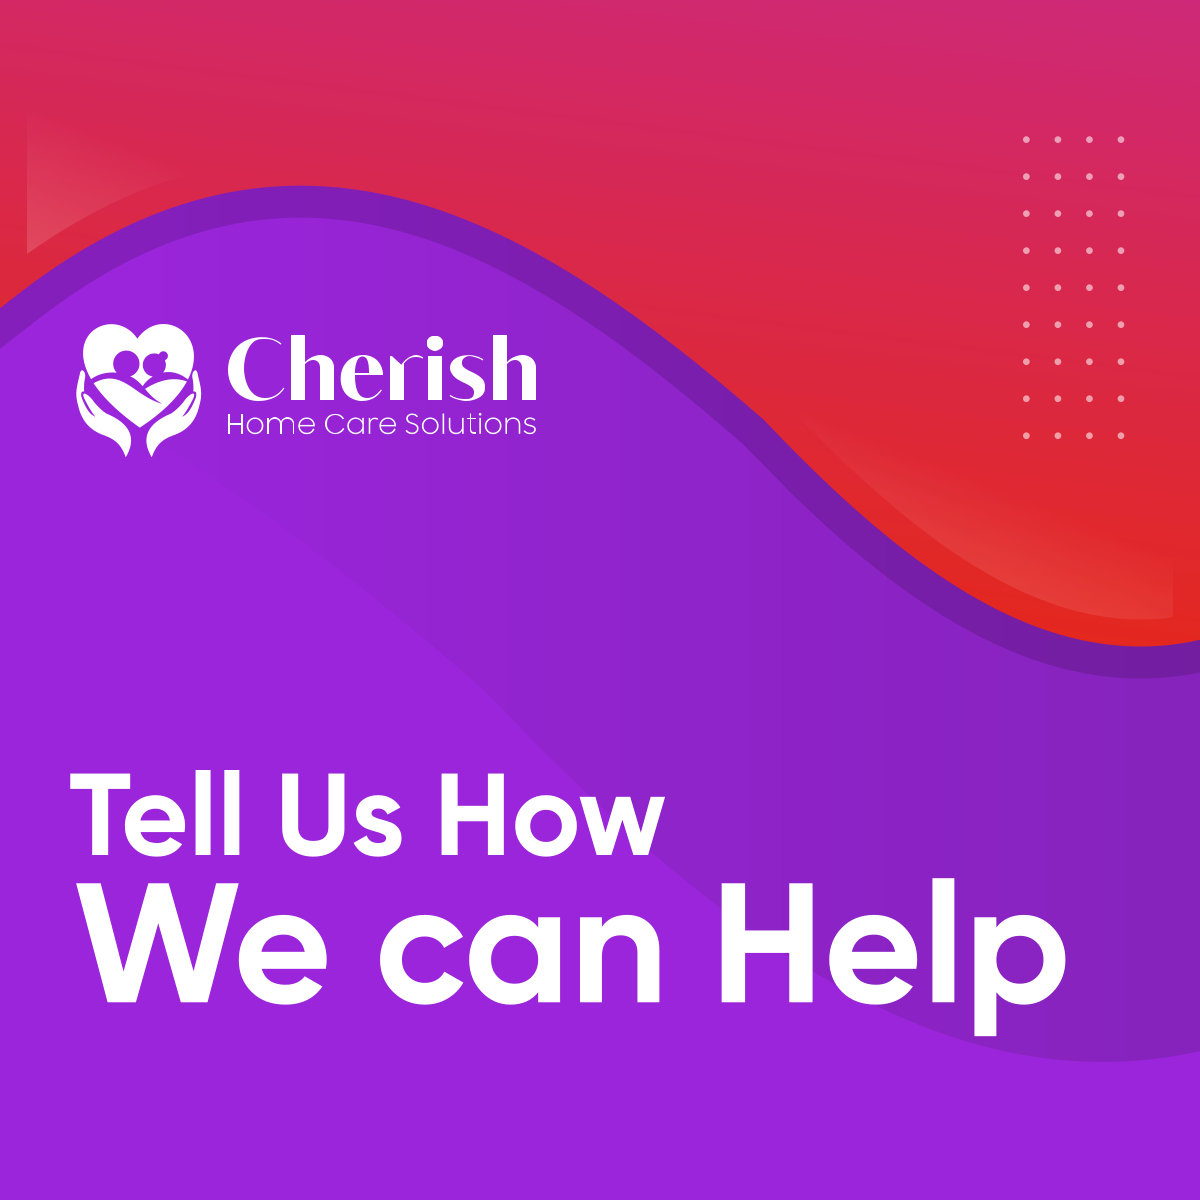 Our team is all excited to provide you and those you love with top-notch care and support. Don't forget to tell our team just how they can help you out. Kindly send us a message if you have any questions, and we will respond to you as soon as possible.

#TopNotchCare #MessageUs